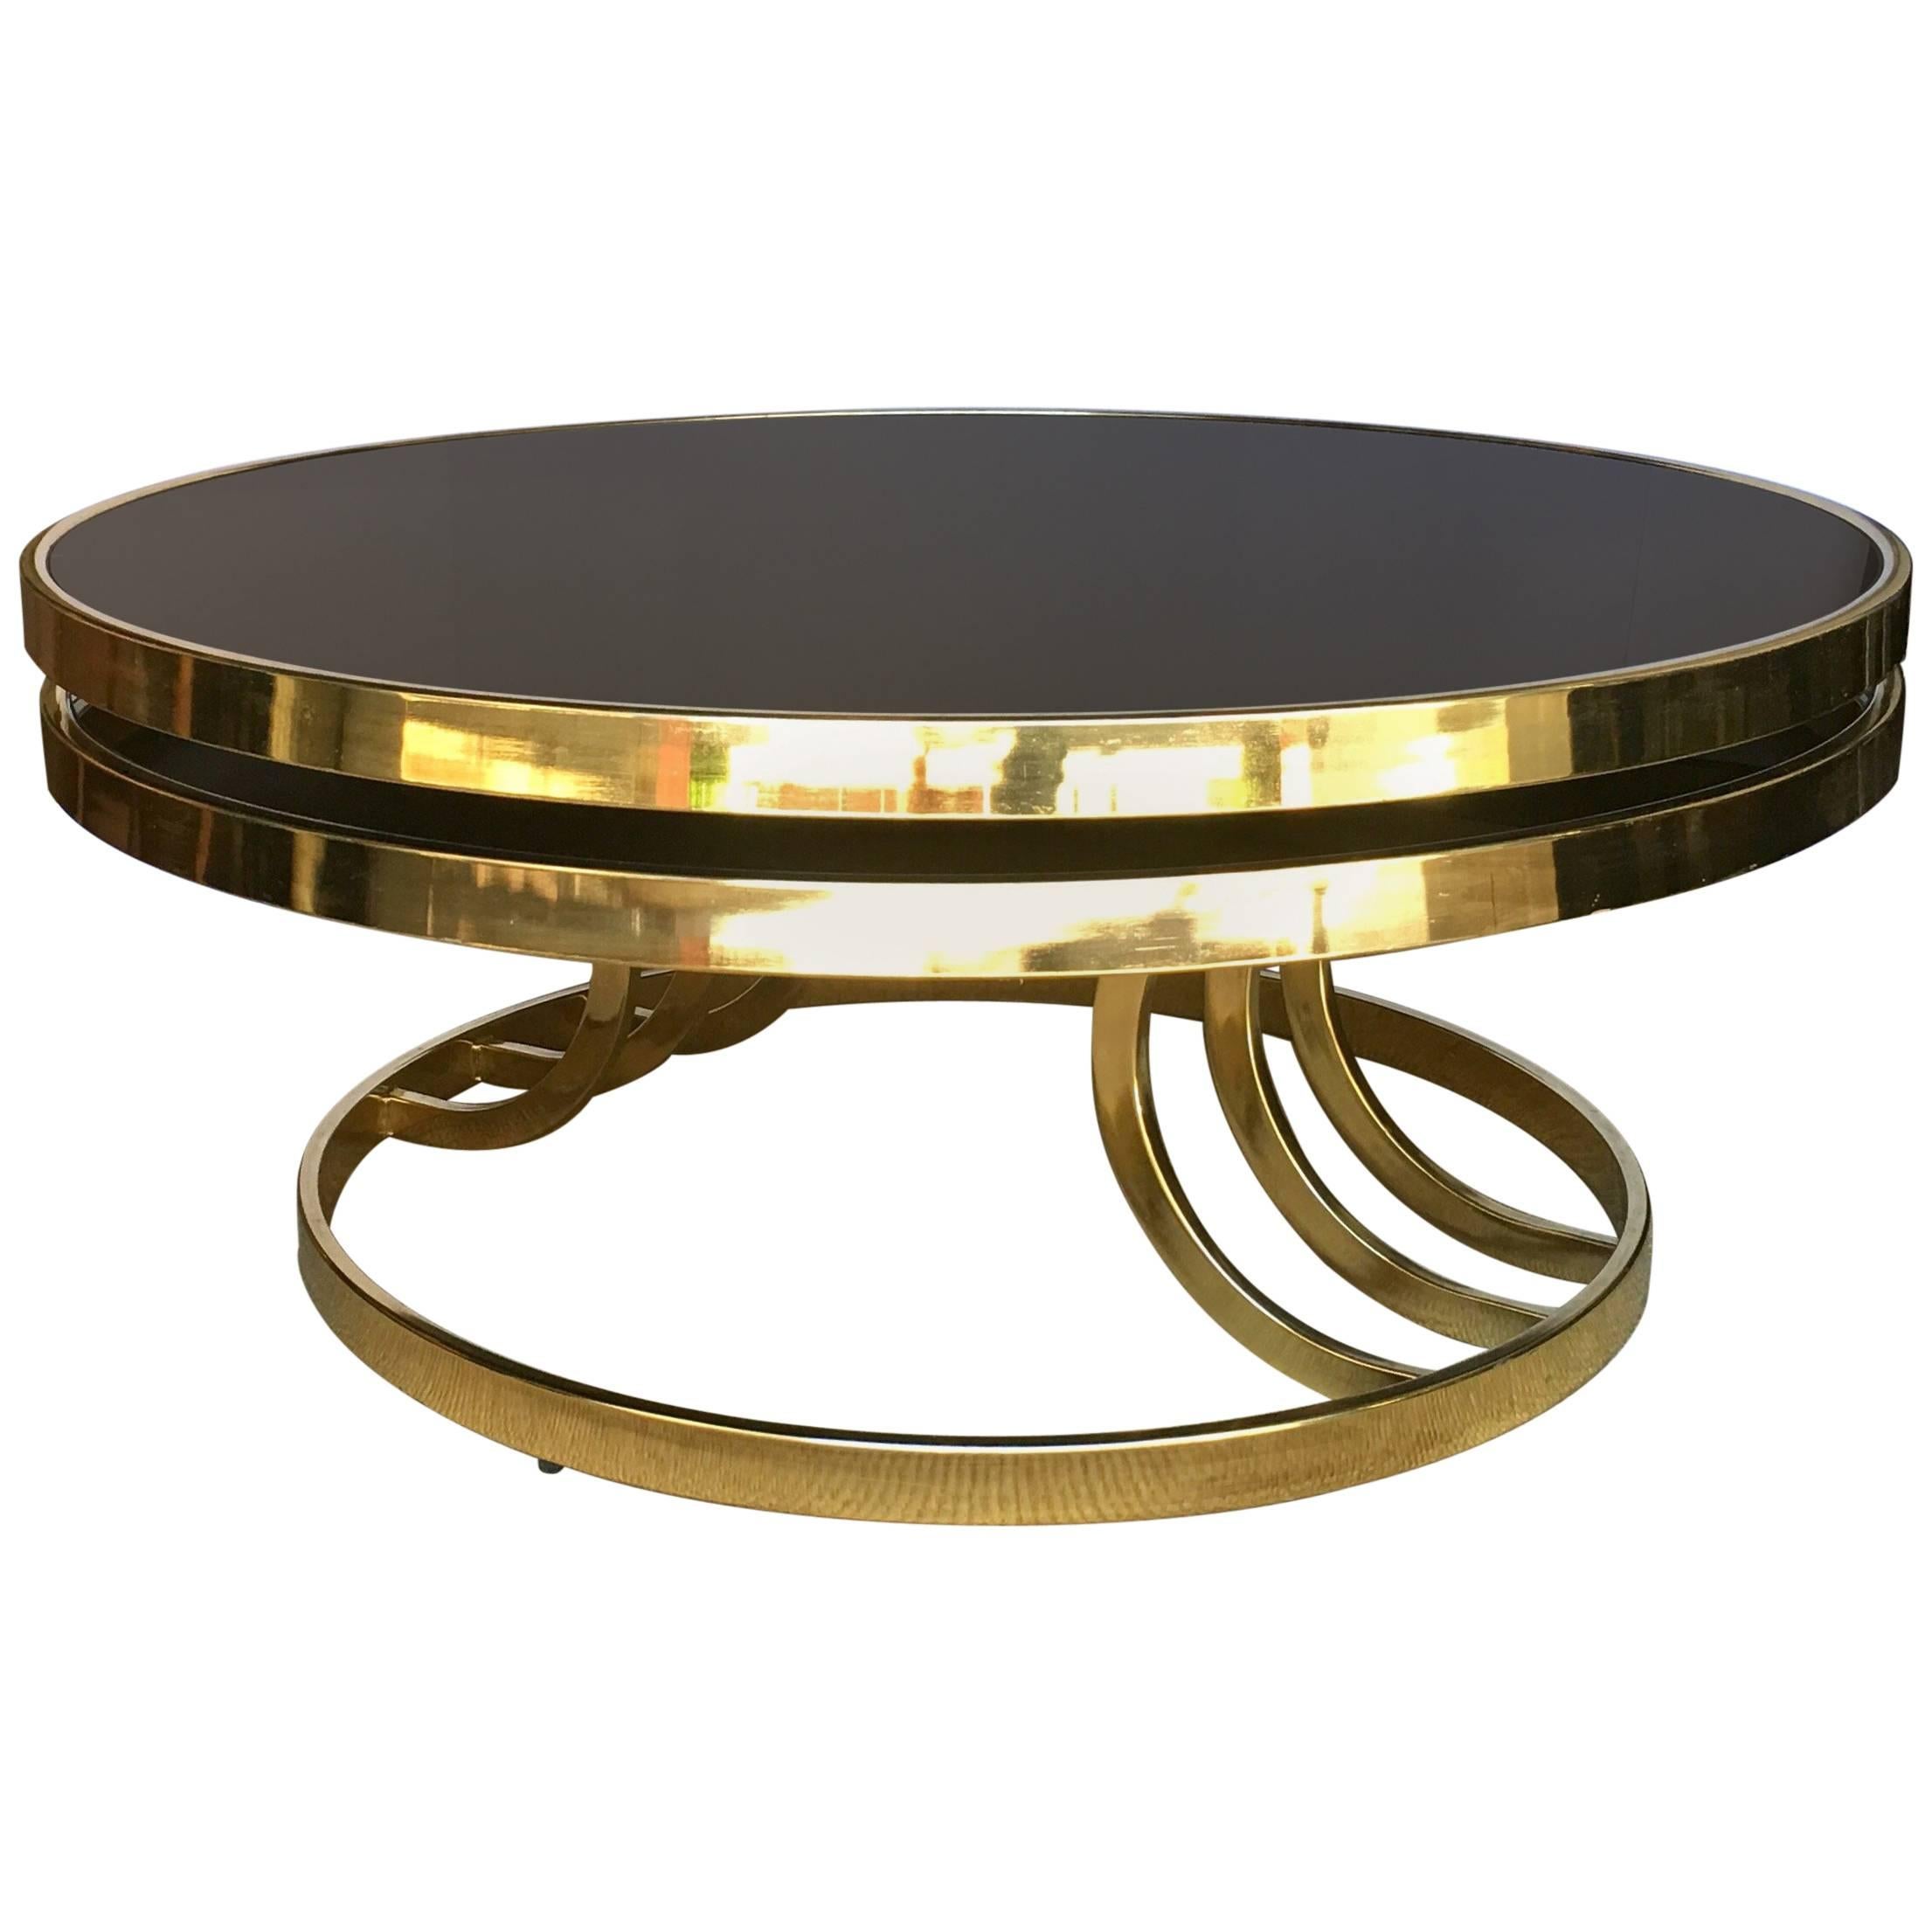 Design Institute America Round Two-Tier Swivel Brass and Glass Cocktail Table